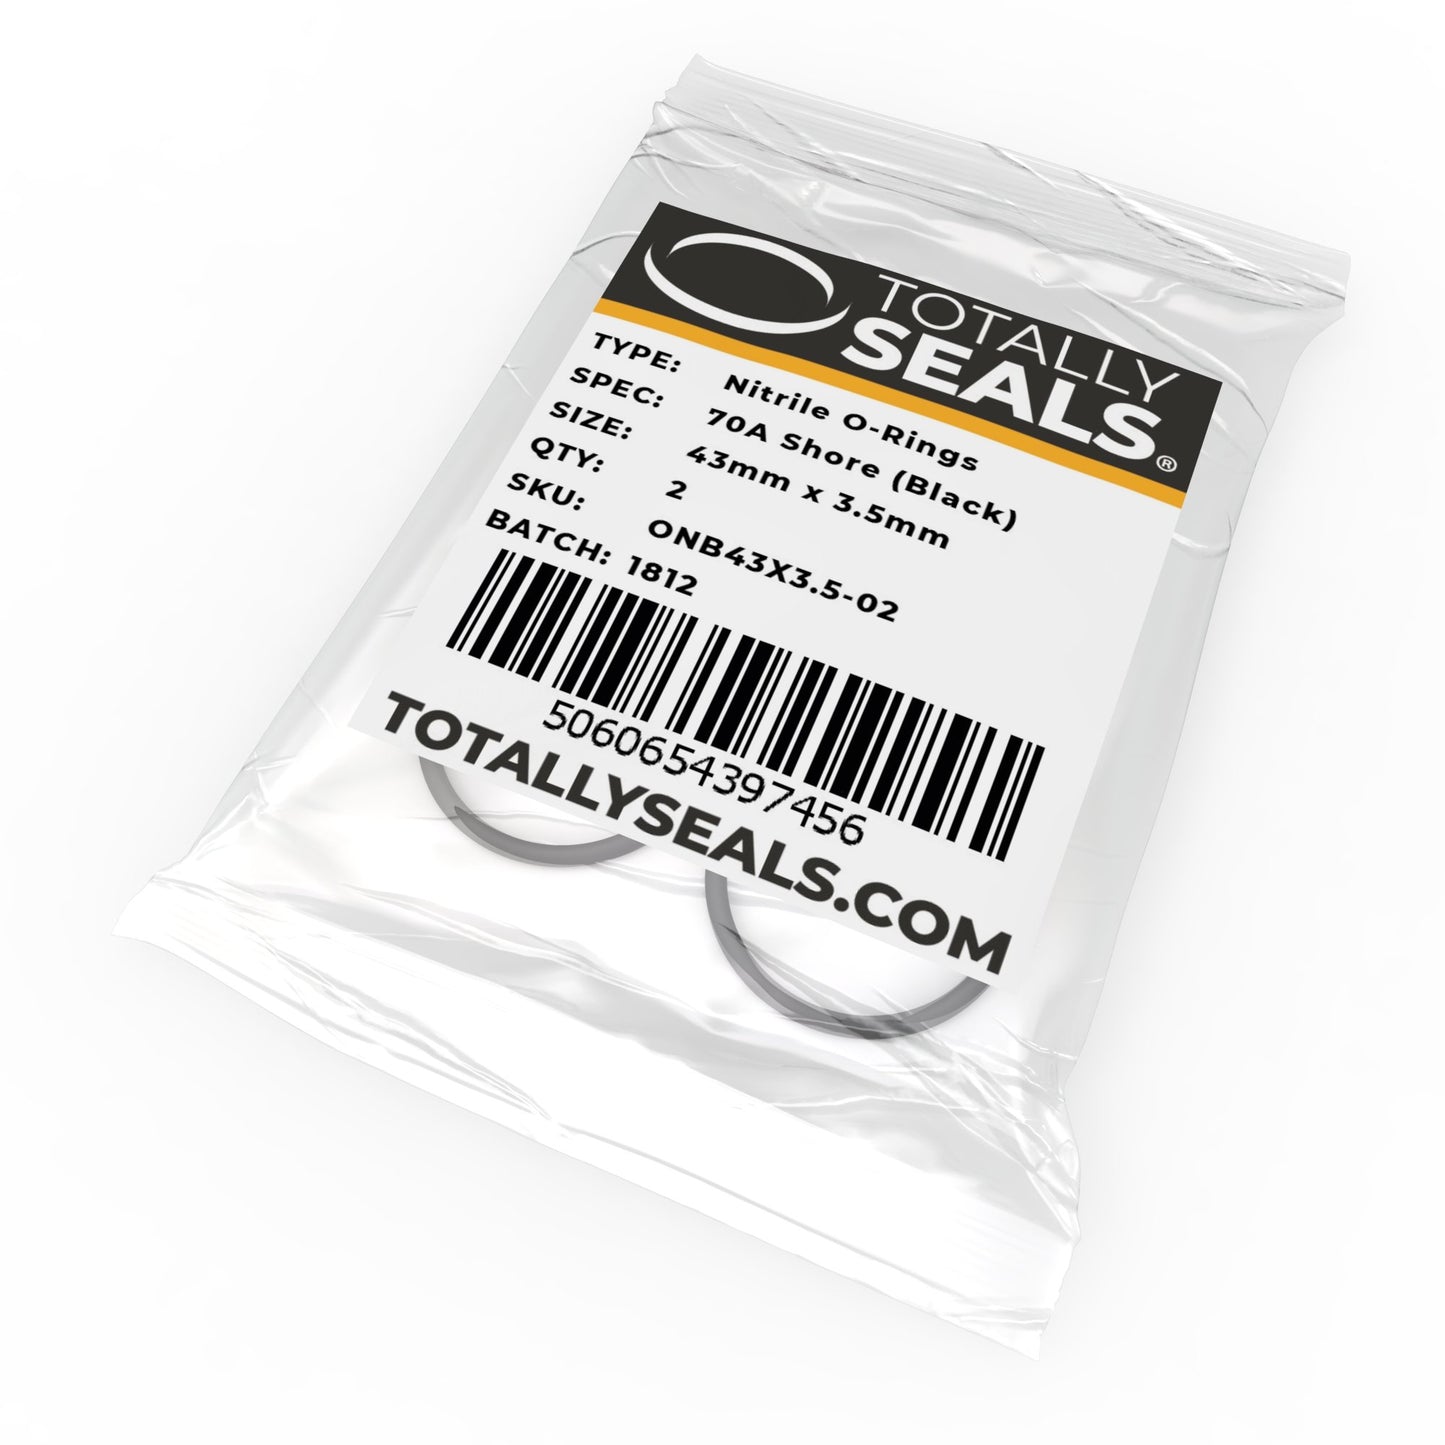 43mm x 3.5mm (50mm OD) Nitrile O-Rings - Totally Seals®